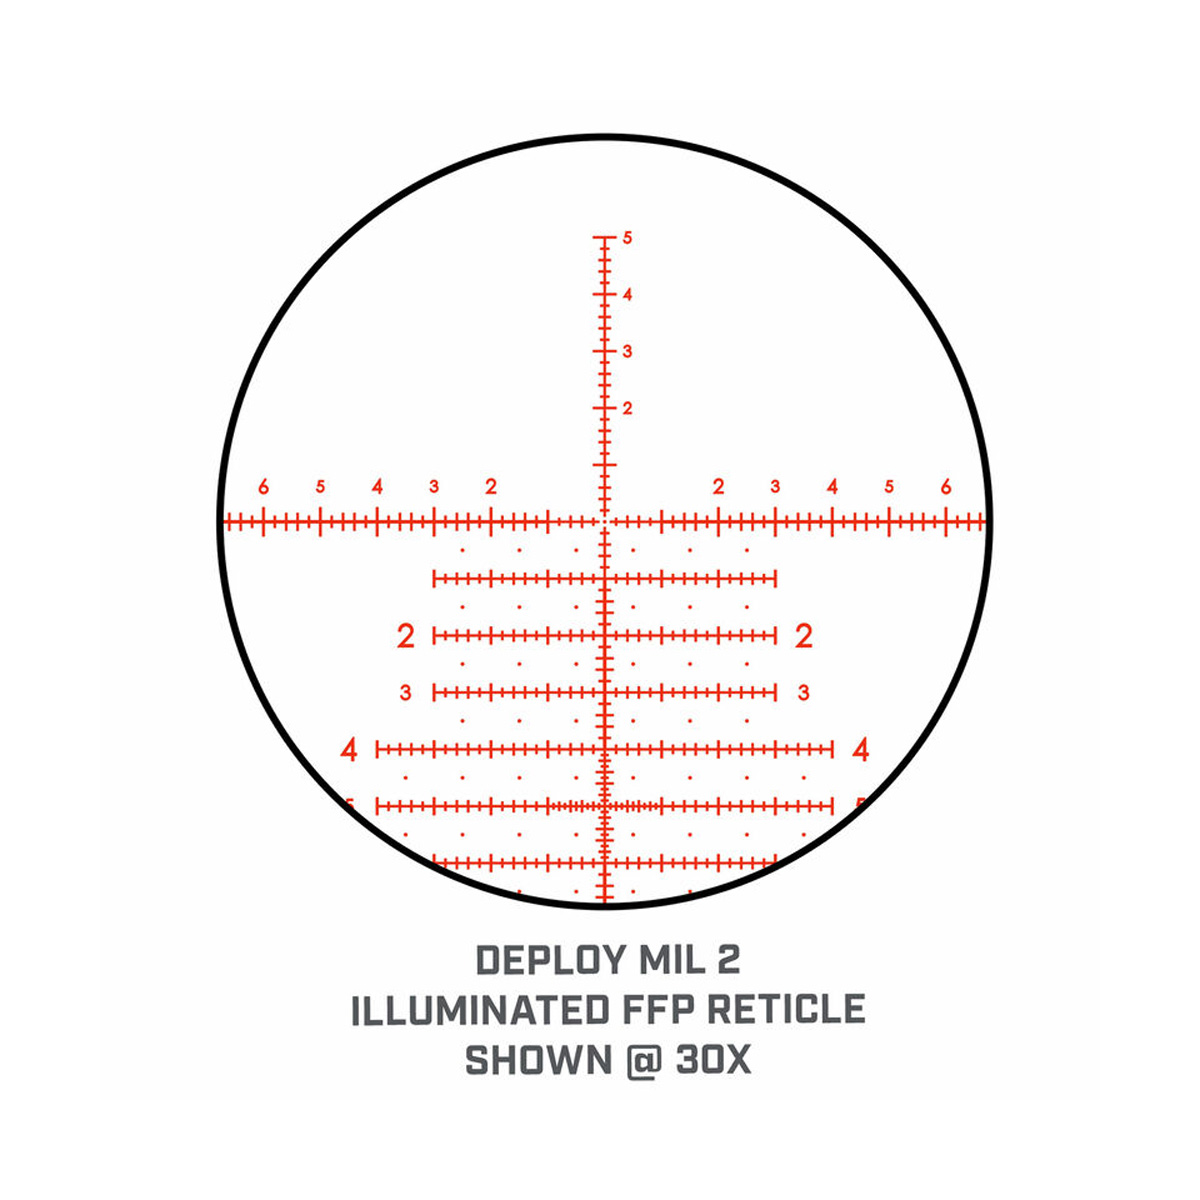 Deploy Mil 2 or DM2 reticle in the Bushnell Match Pro ED 5-30x56mm